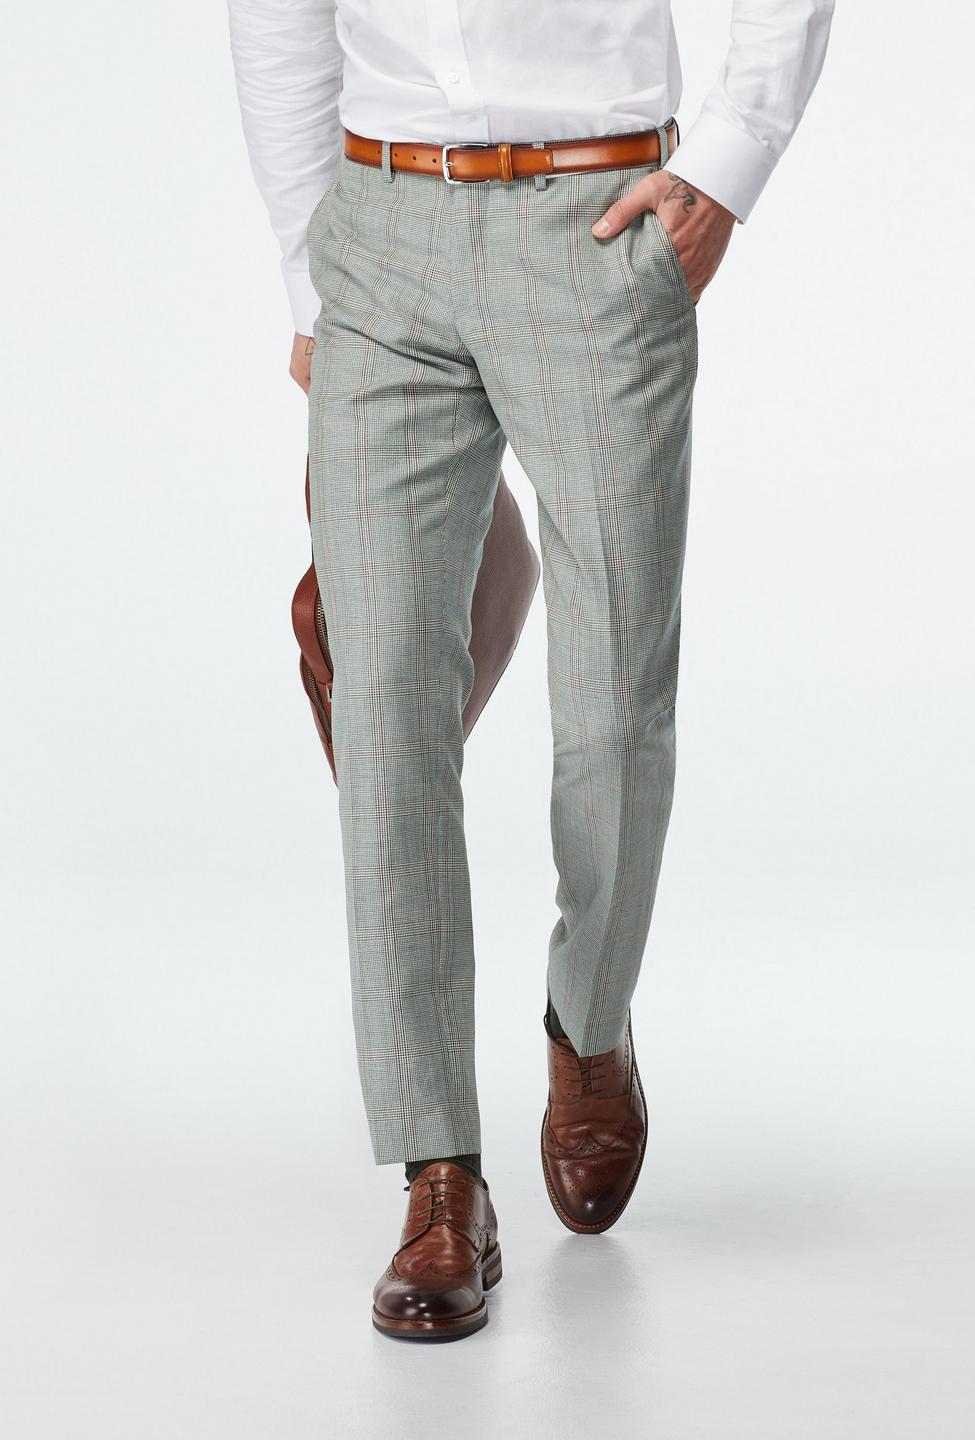 Green pants - Southport Houndstooth Design from Seasonal Indochino Collection